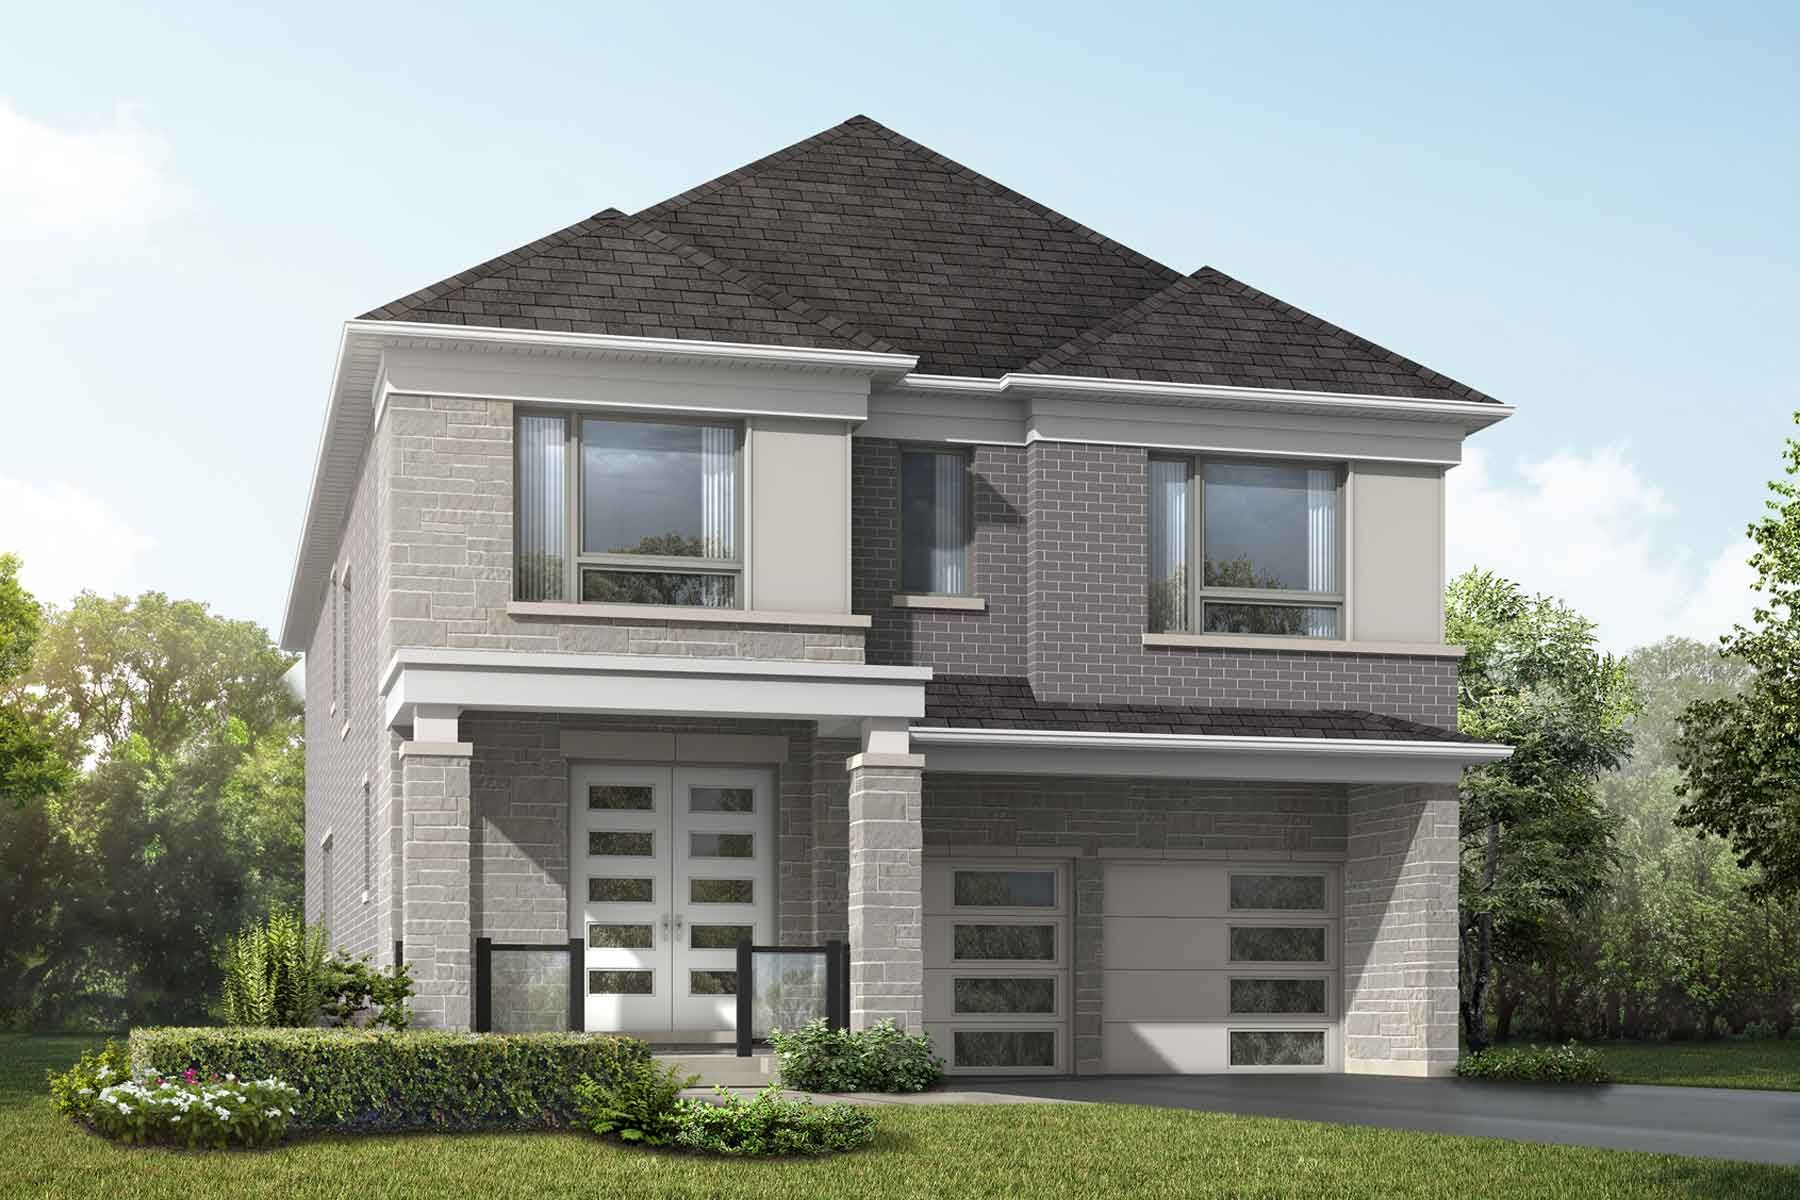 A detached Modern style home with a double car garage.